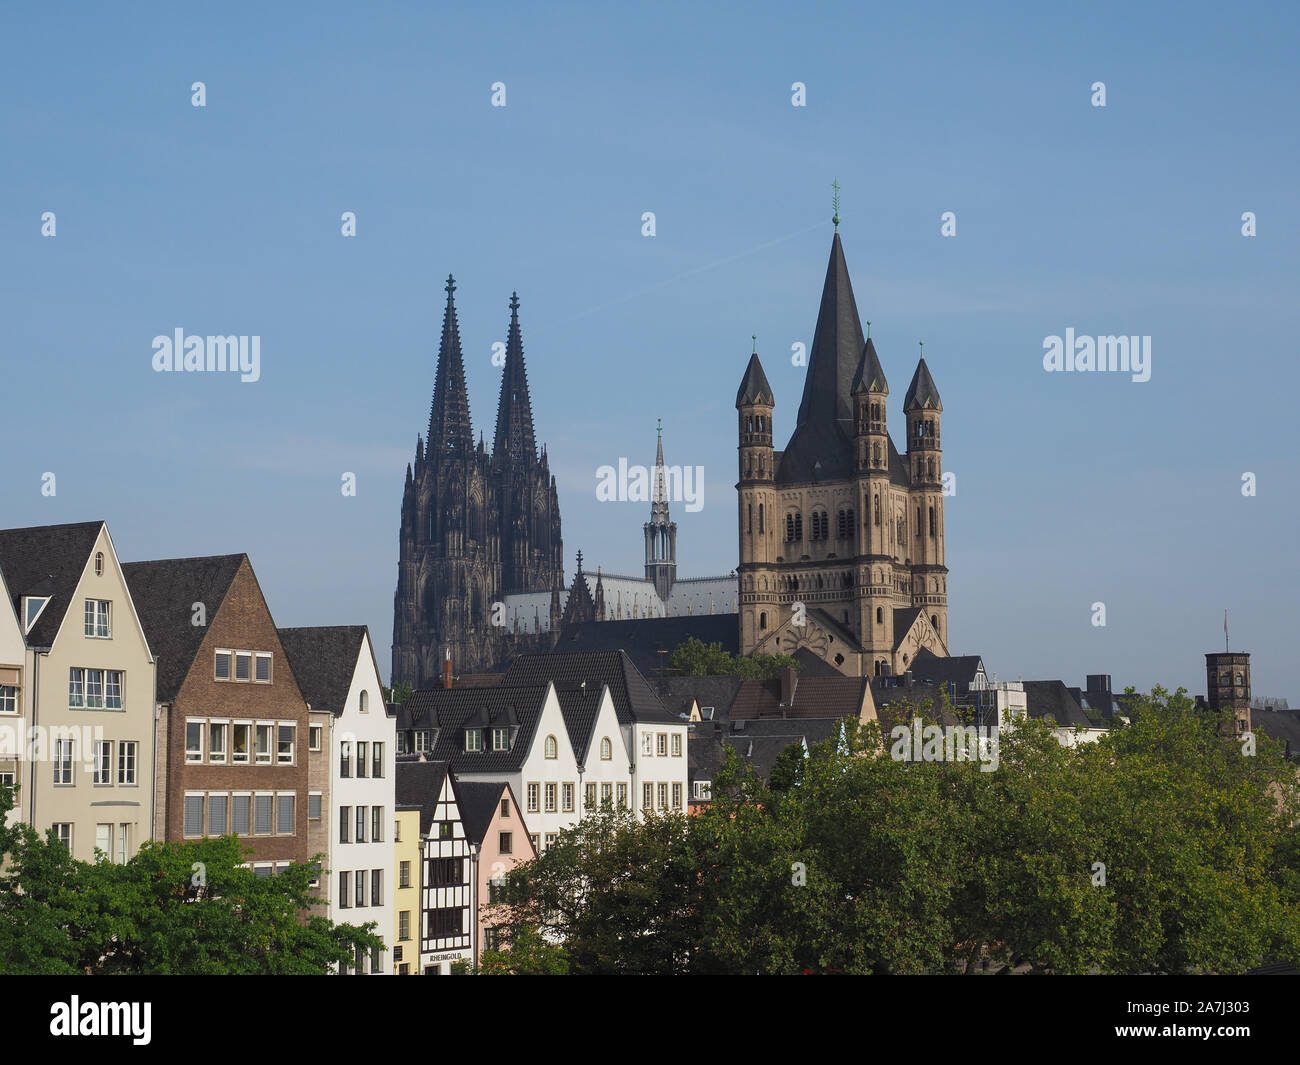 KOELN, GERMANY - CIRCA AUGUST 2019: Altstadt (meaning Old Town) Stock Photo